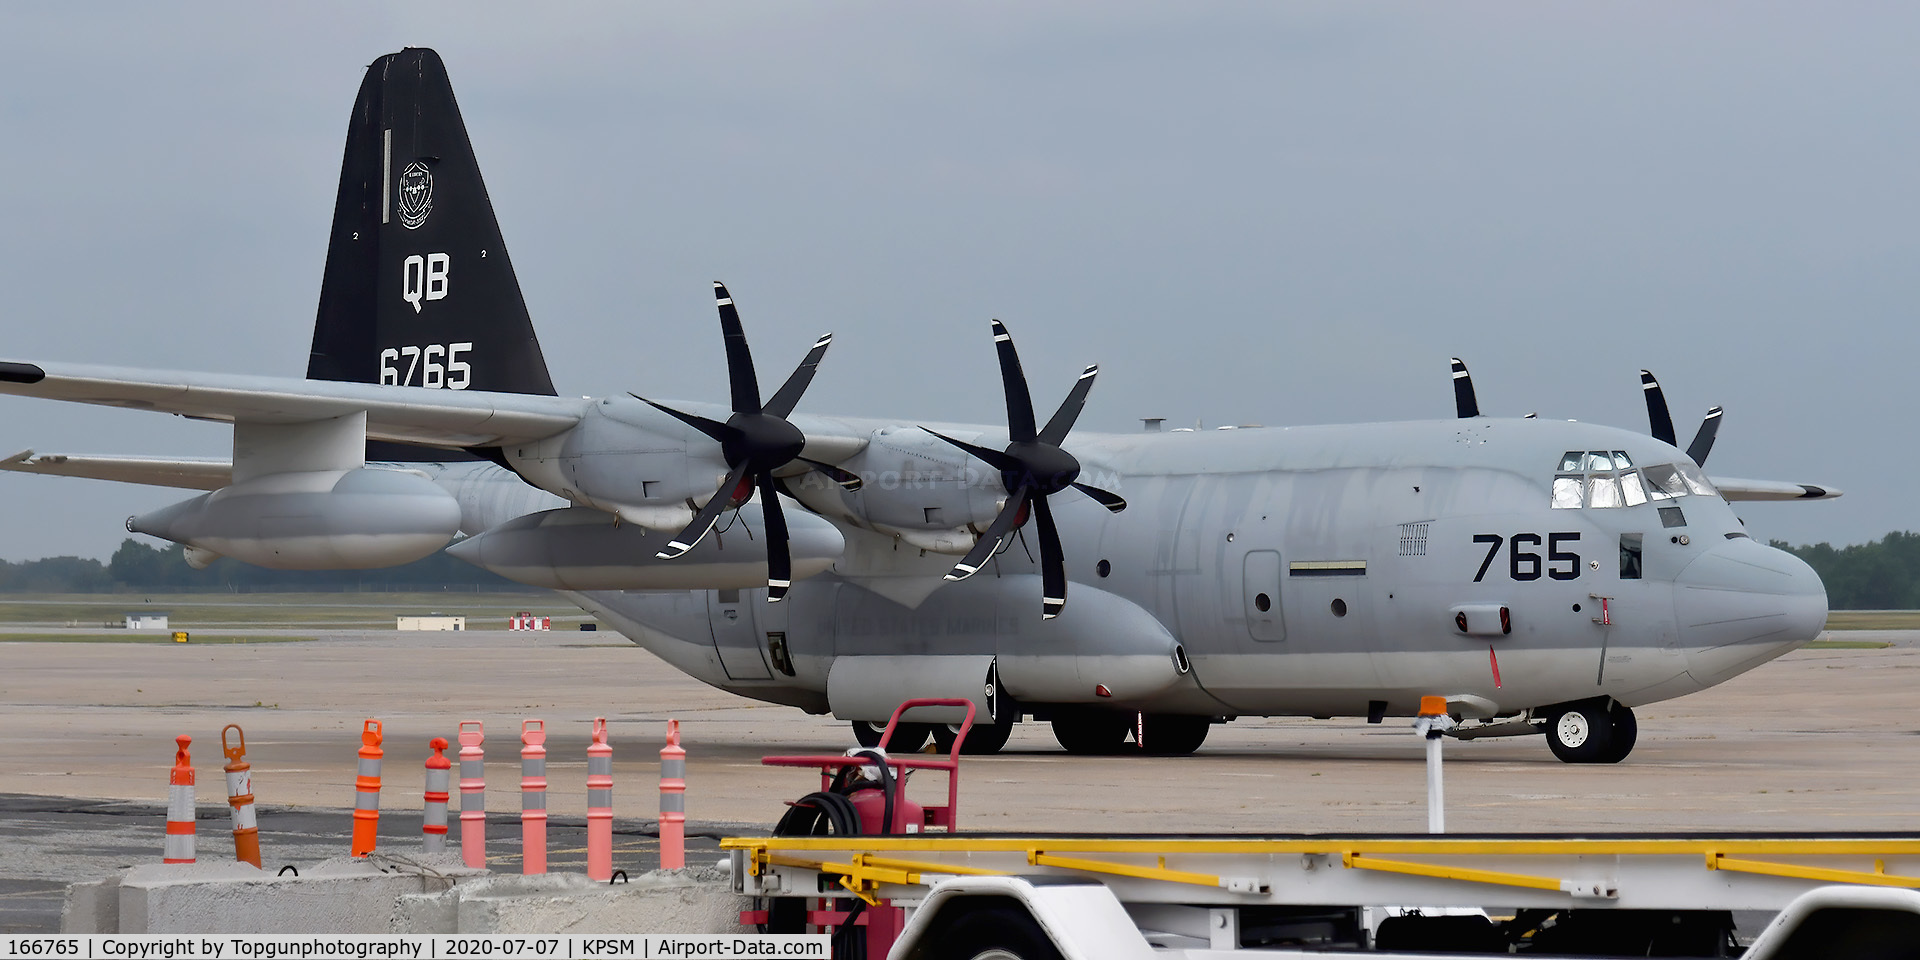 166765, 2005 Lockheed Martin KC-130J Hercules C/N 382-5565, KC-130J of VMGR-352, based out of Miramar. Later crashed landed while refueling a F-35B. All walked away.